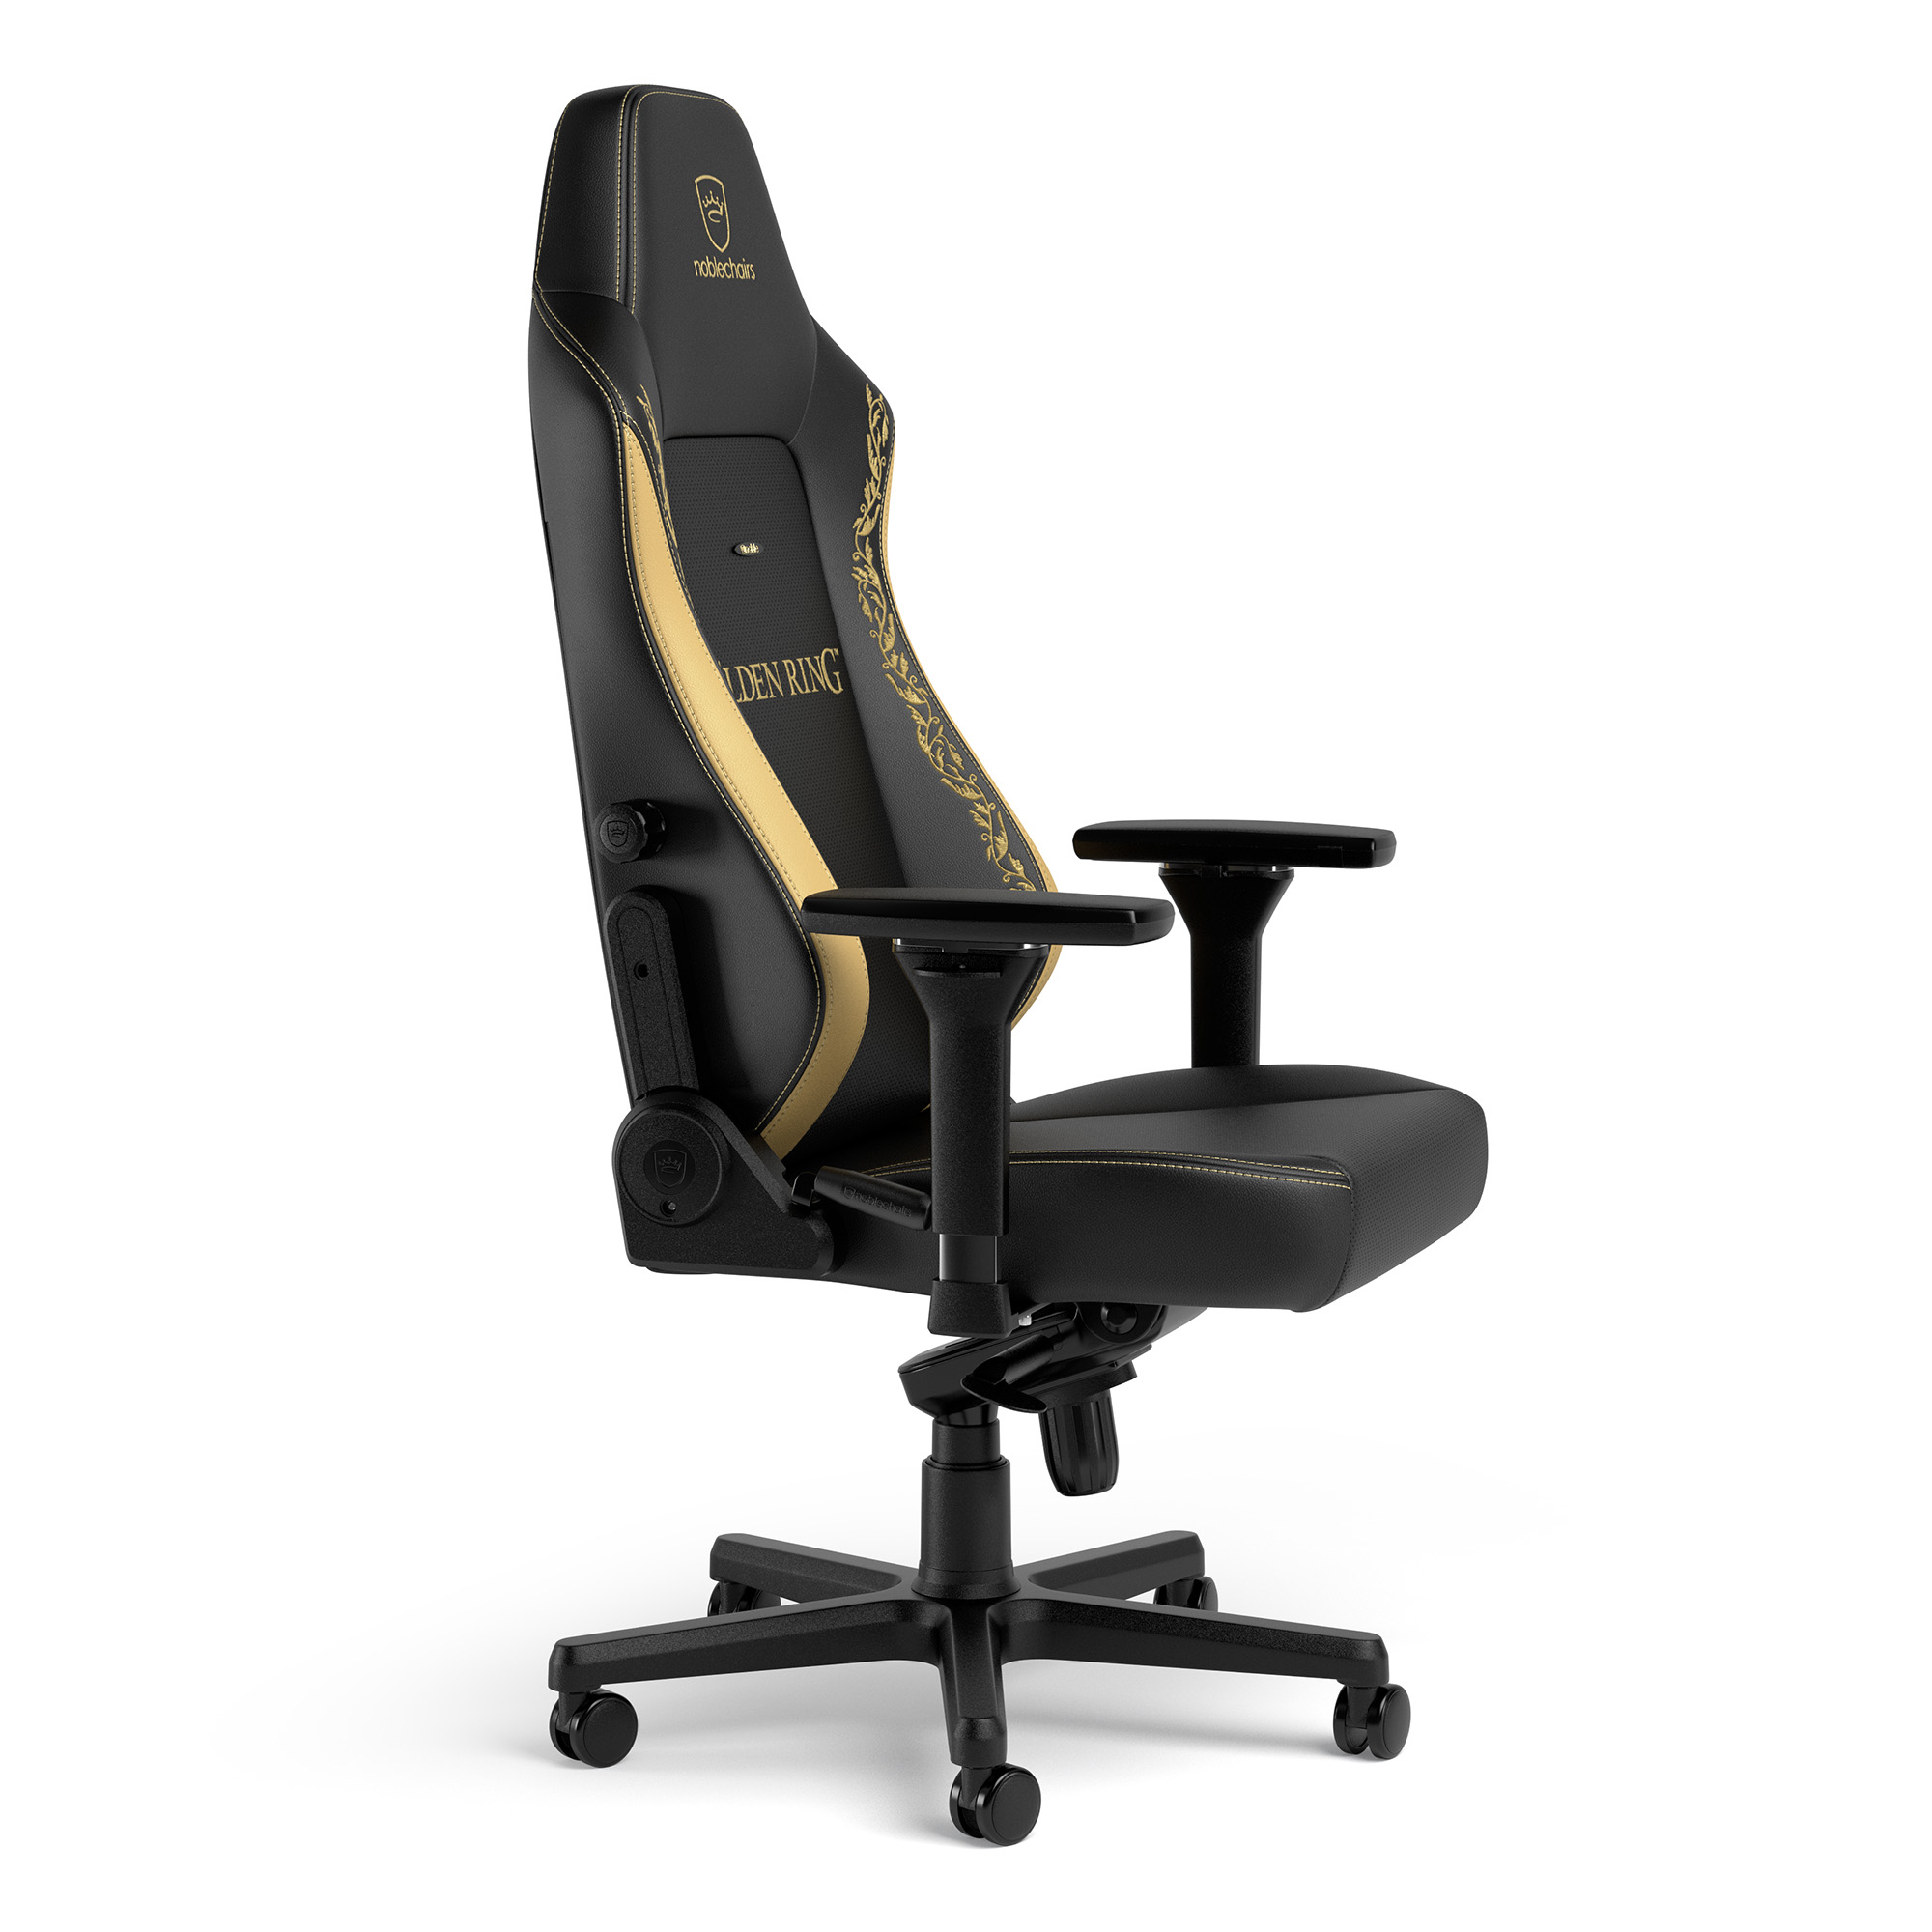 noblechairs - noblechairs HERO Gaming Chair Elden Ring Special Edition